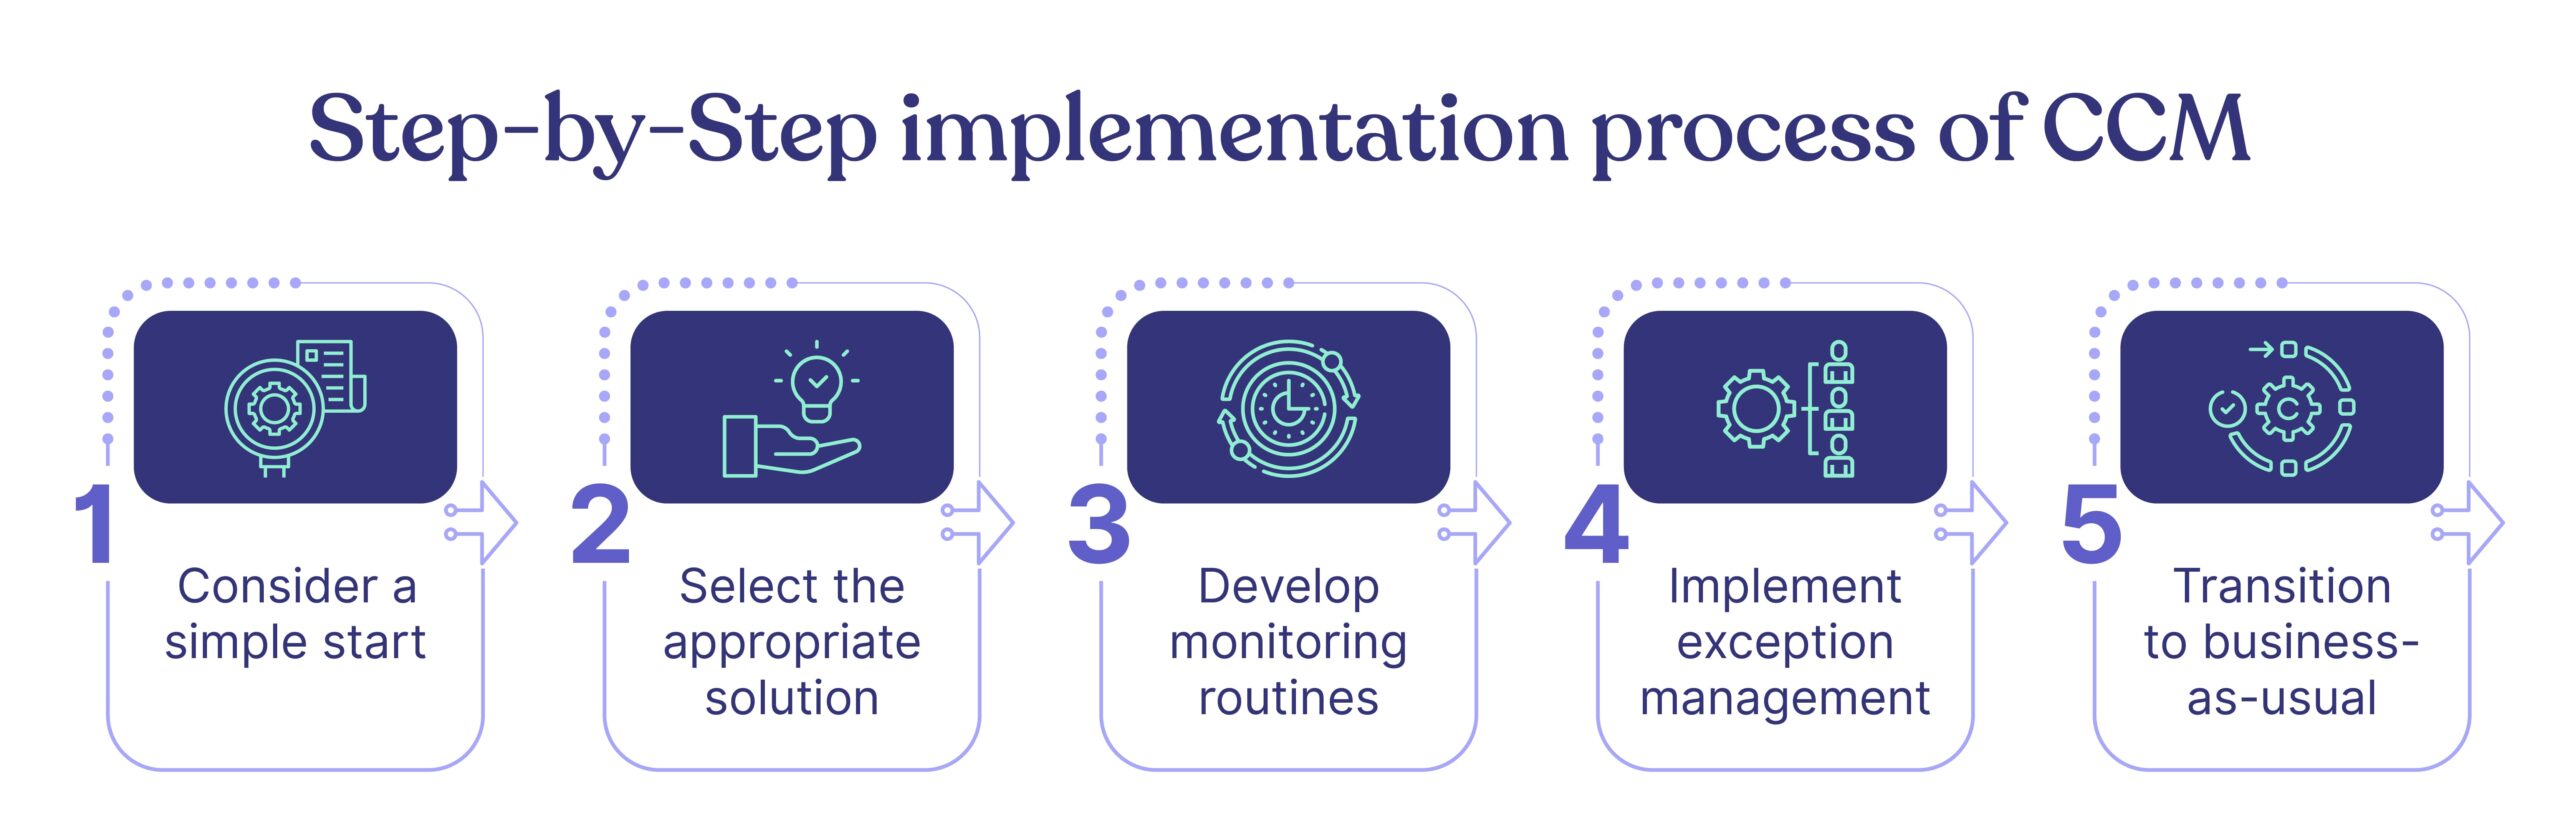 step by step implementation process